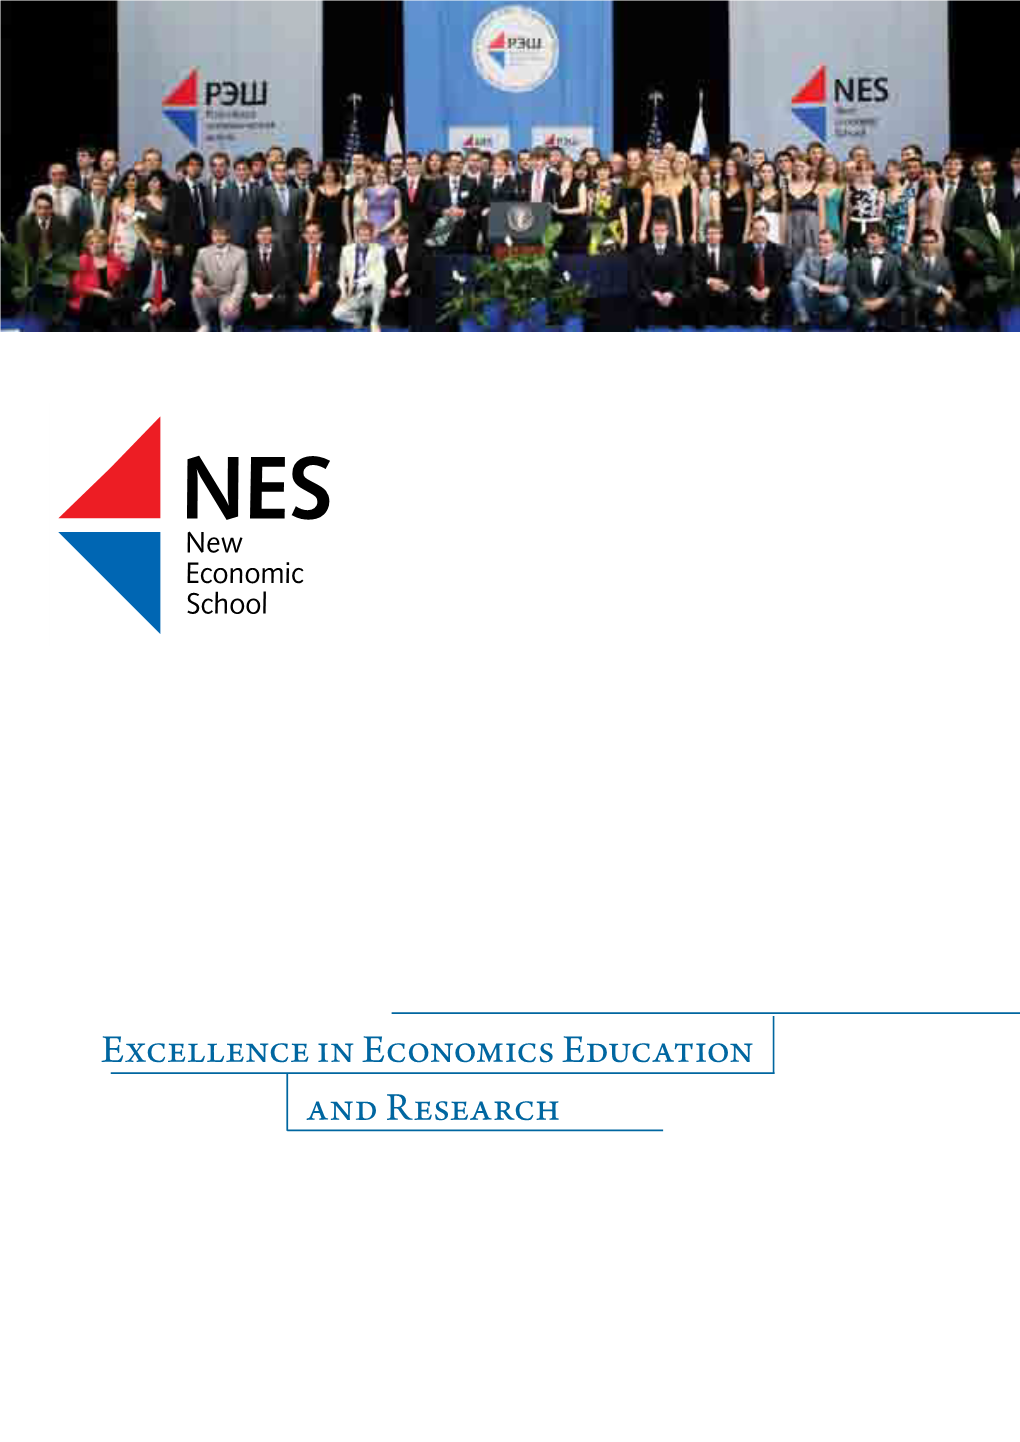 Excellence in Economics Education and Research